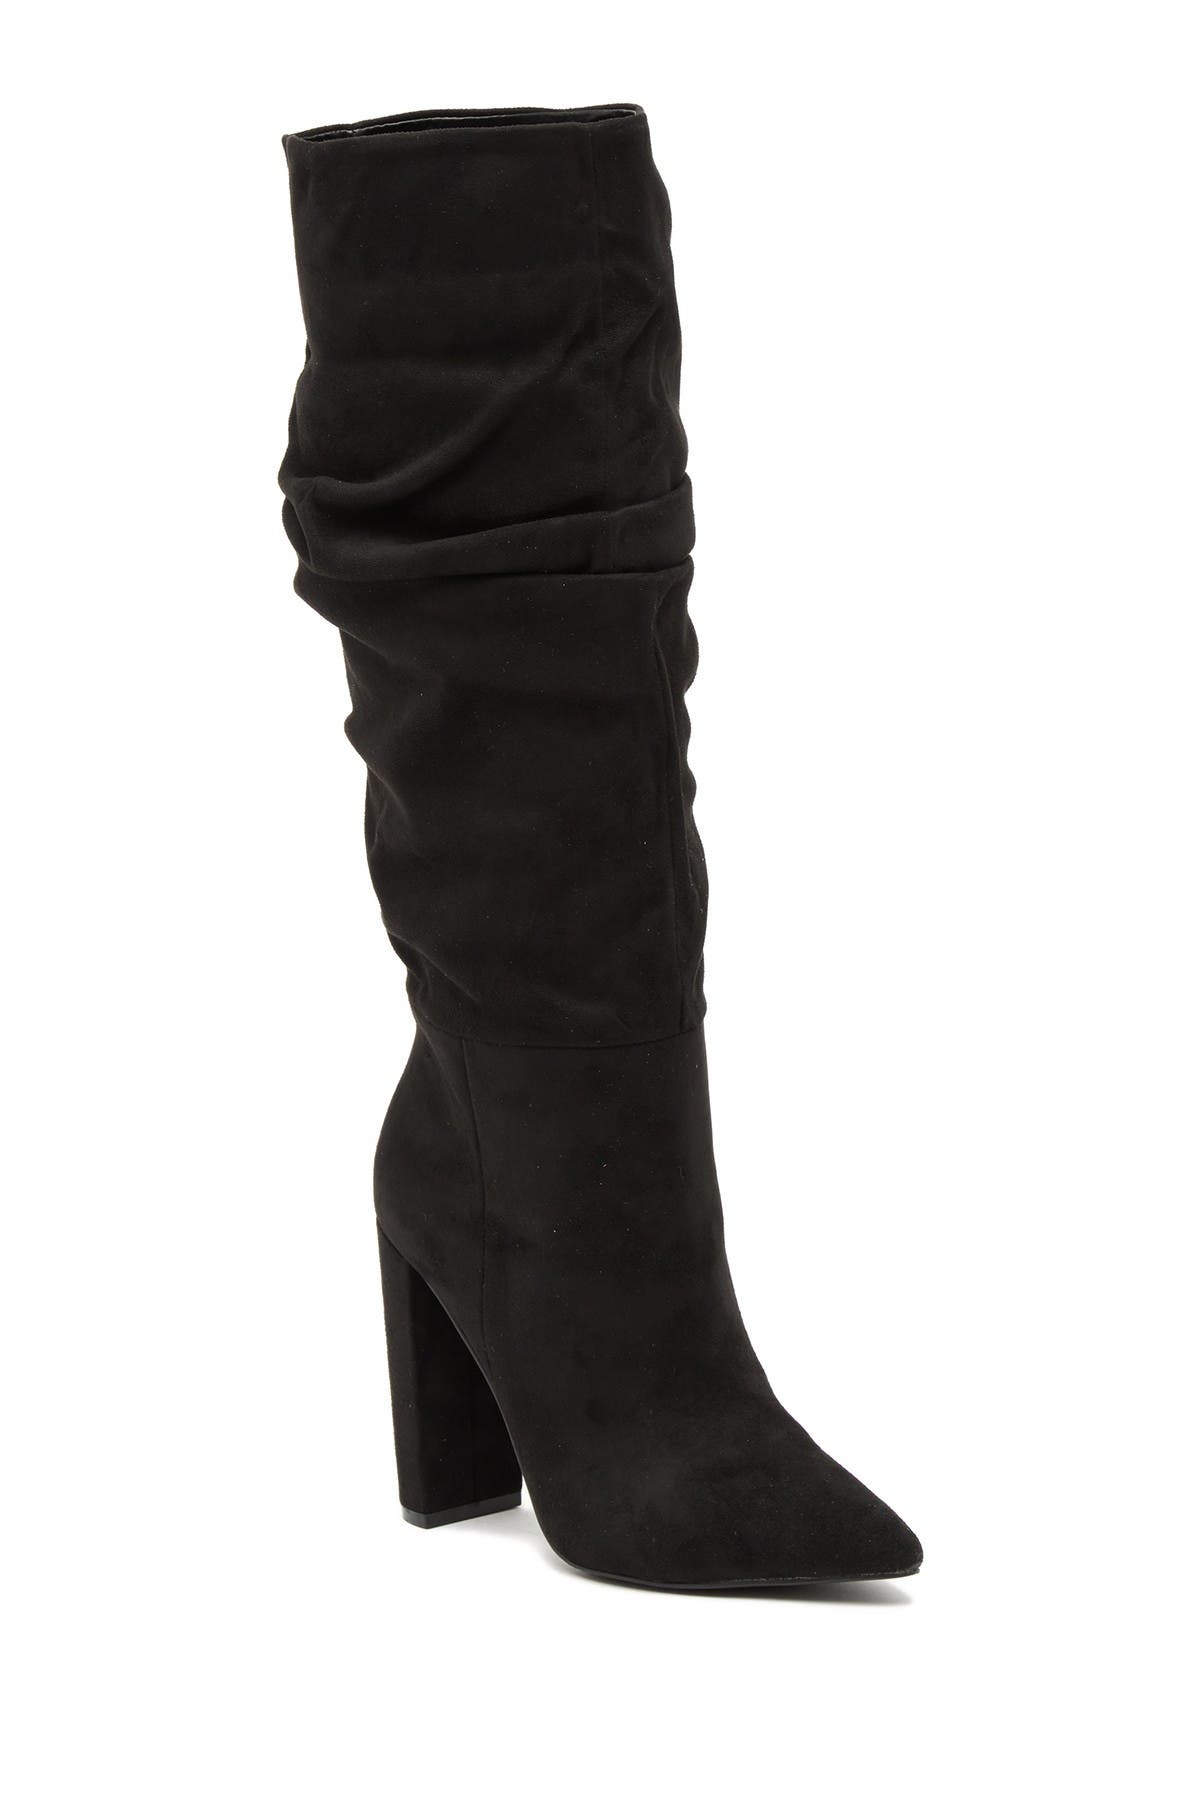 black slouchy over the knee boots